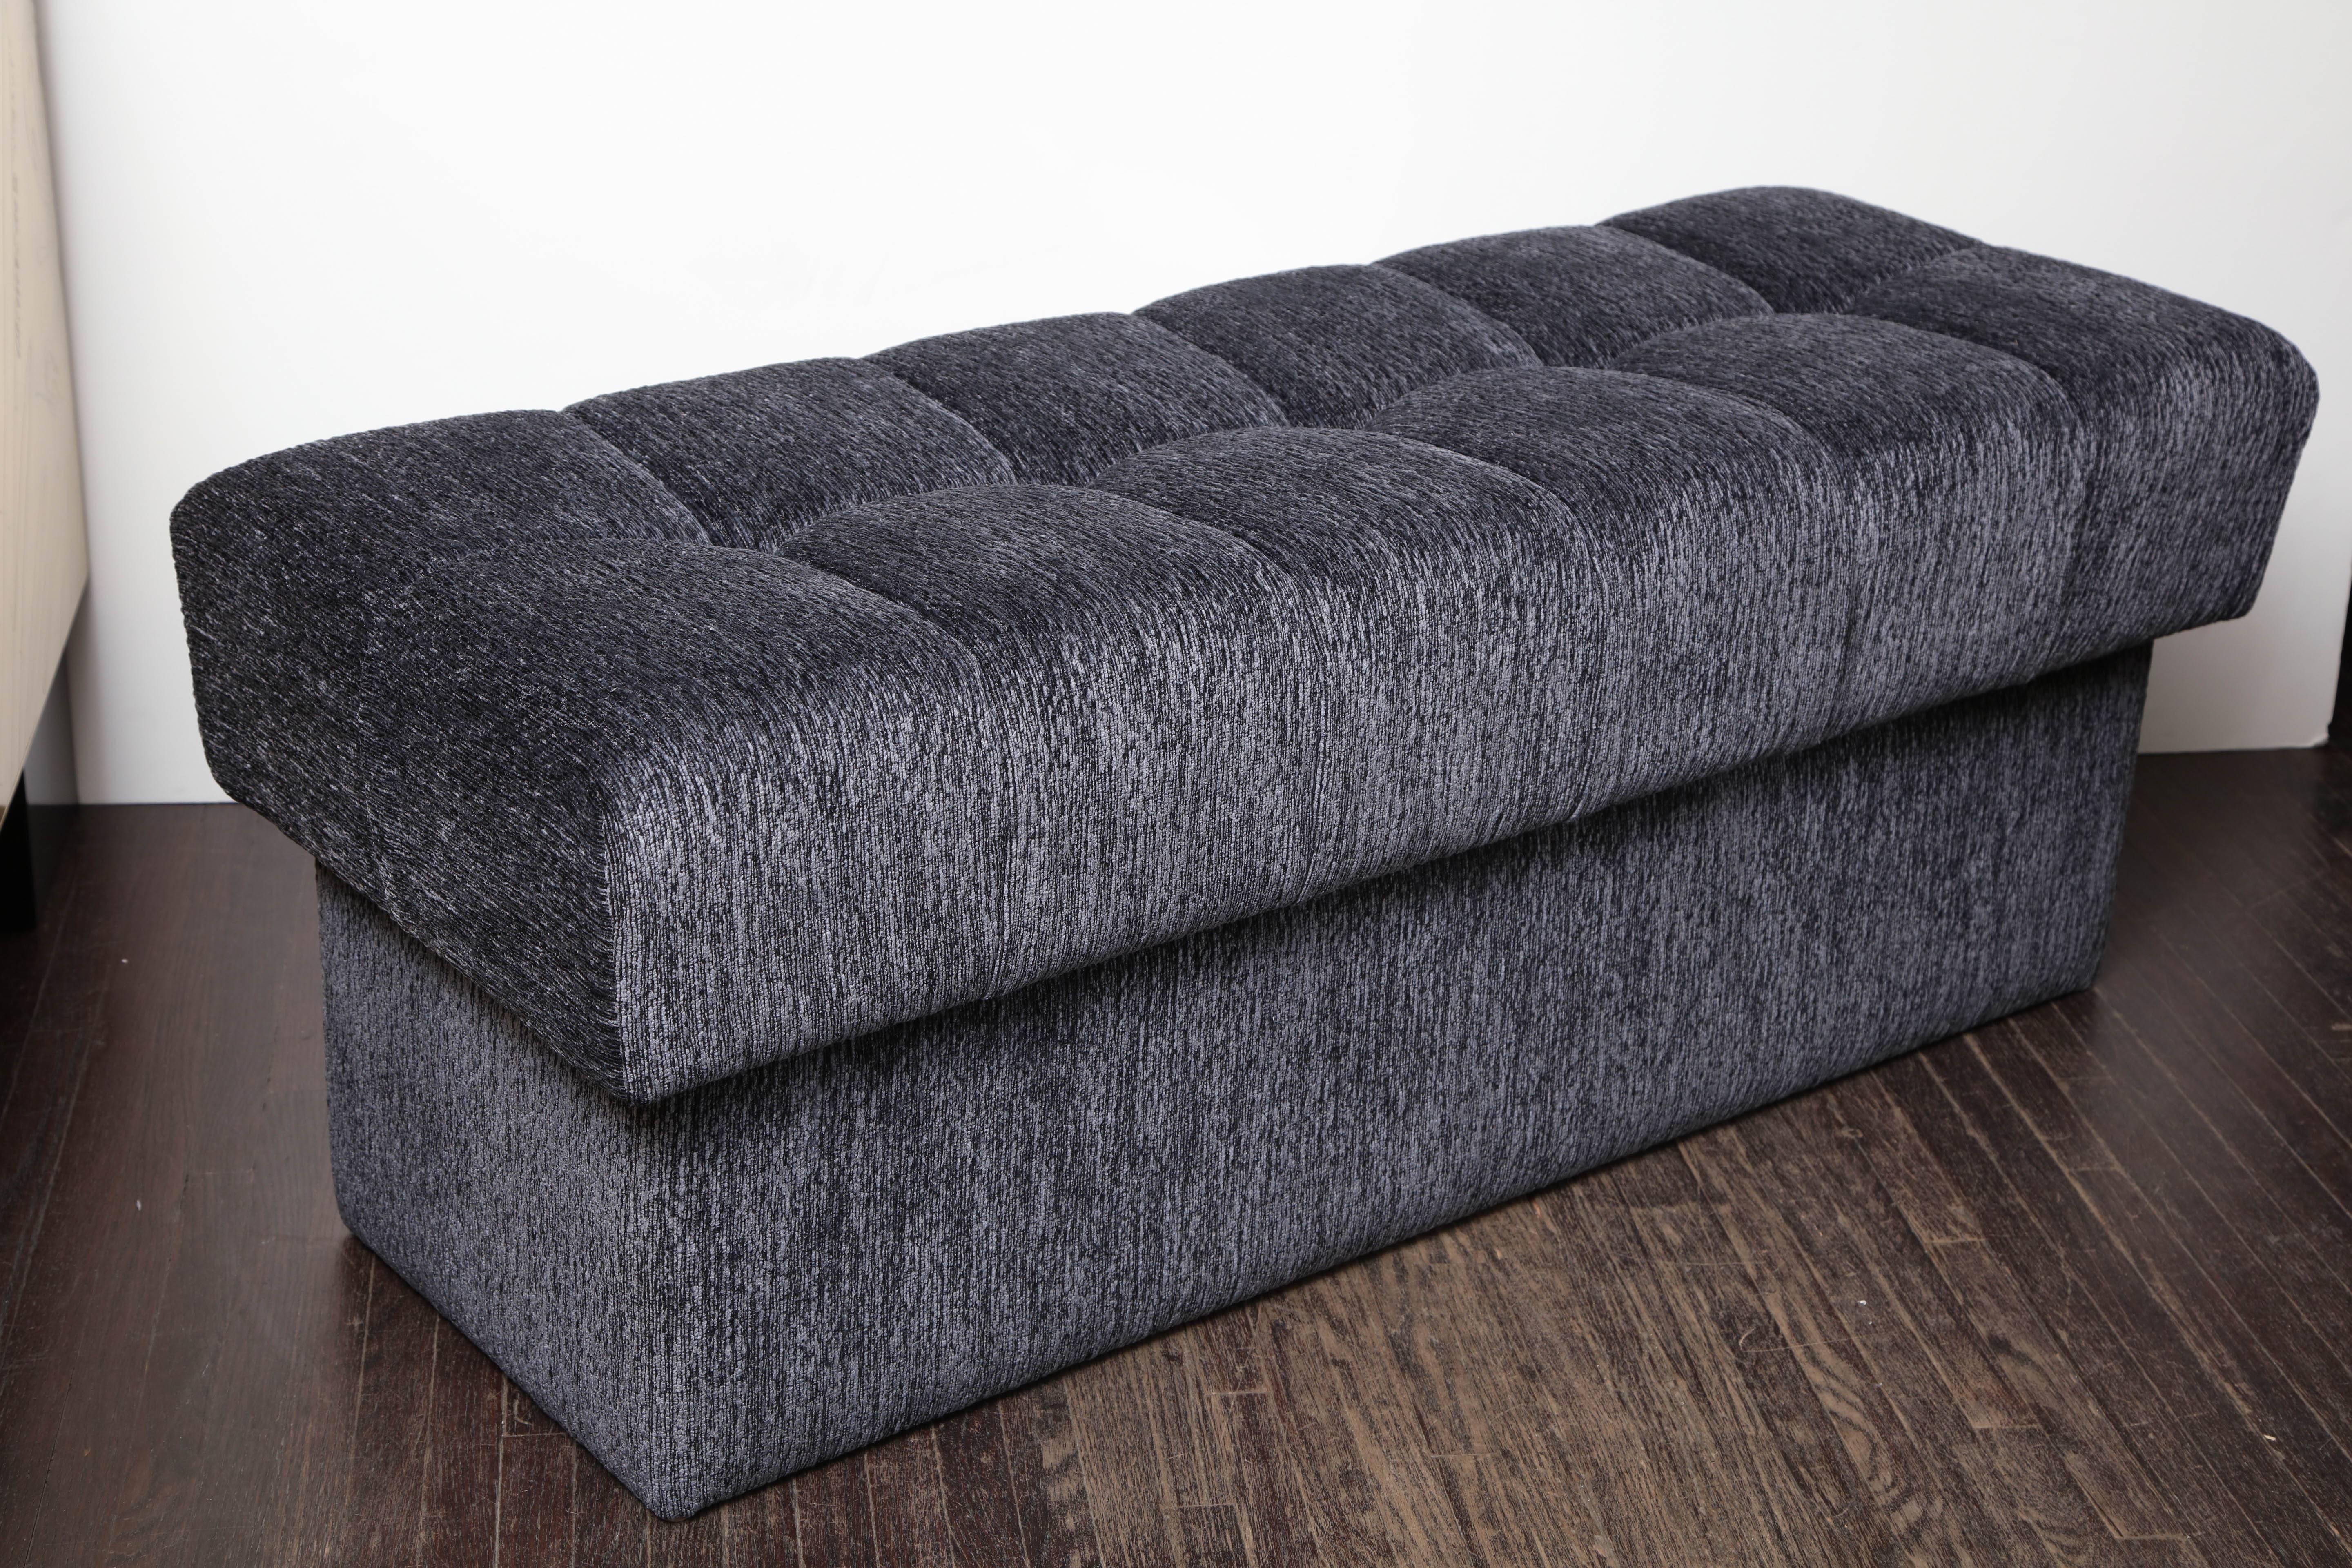 Custom tufted bench with interior storage. Customization is available in different sizes and fabrics (COM).